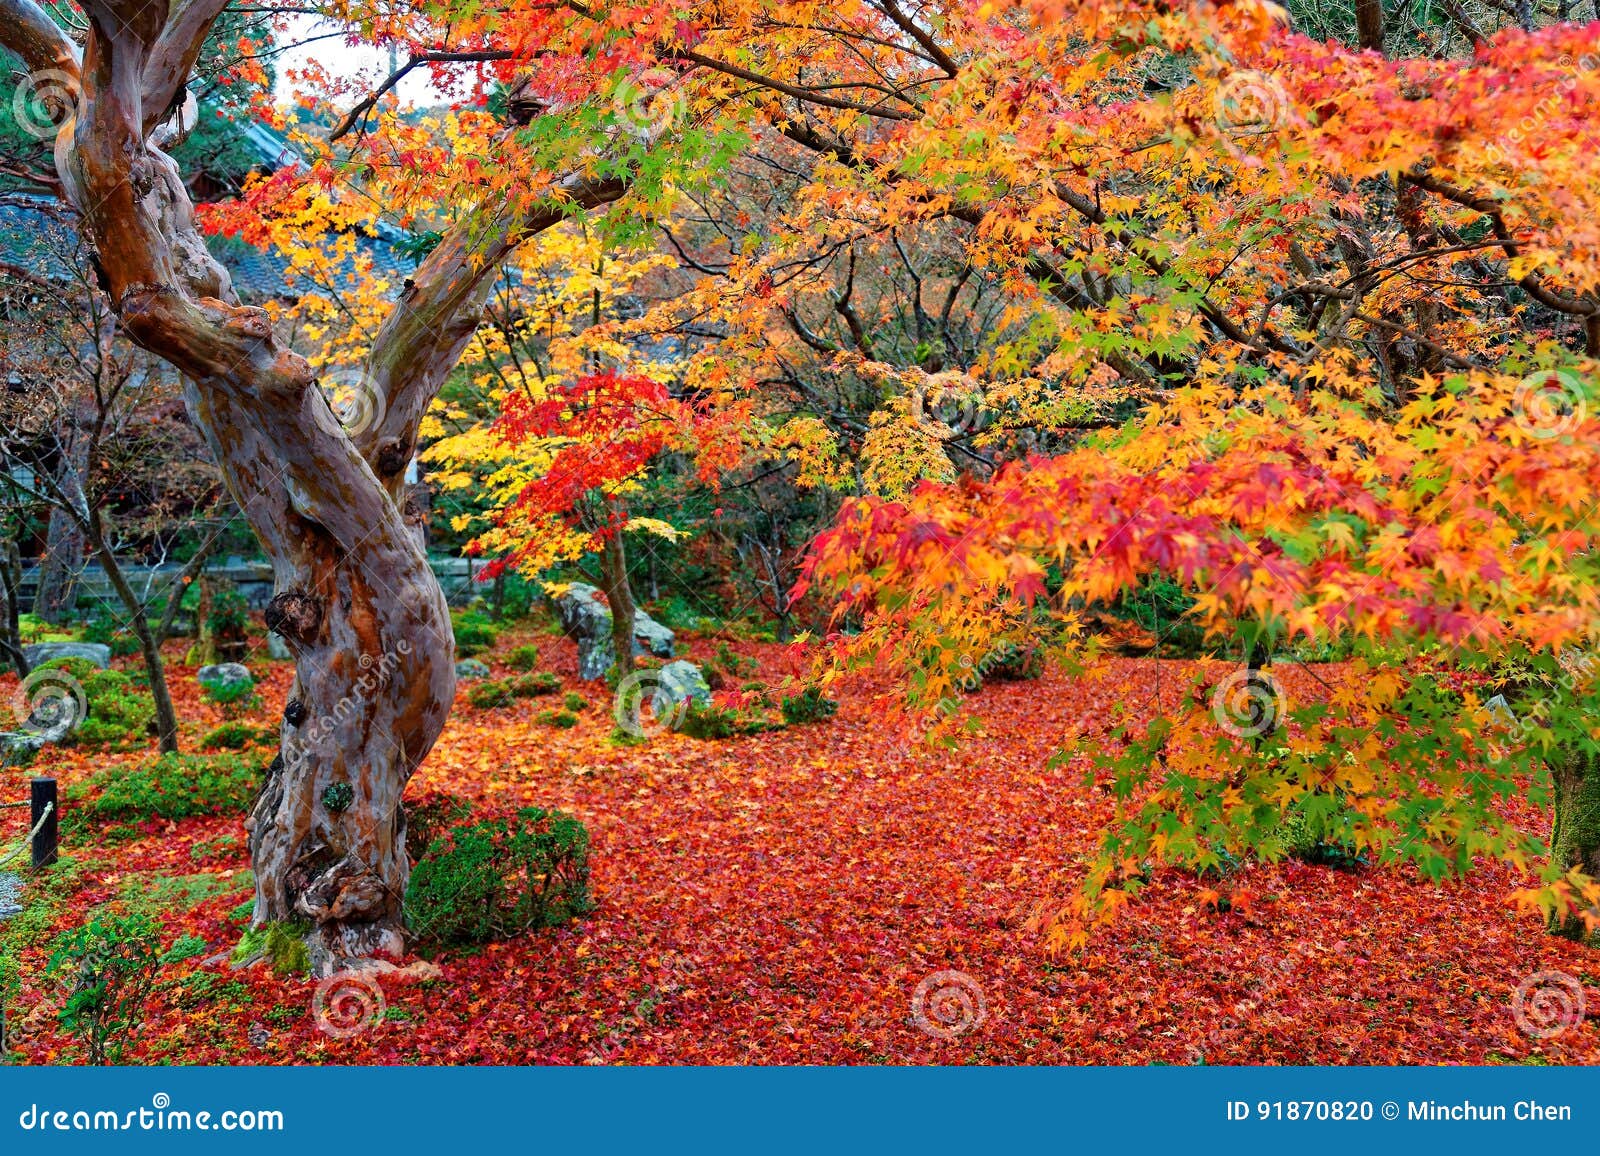 beautiful autumn scenery of colorful foliage of fiery maple trees and a red carpet of fallen leaves in a garden in kyoto